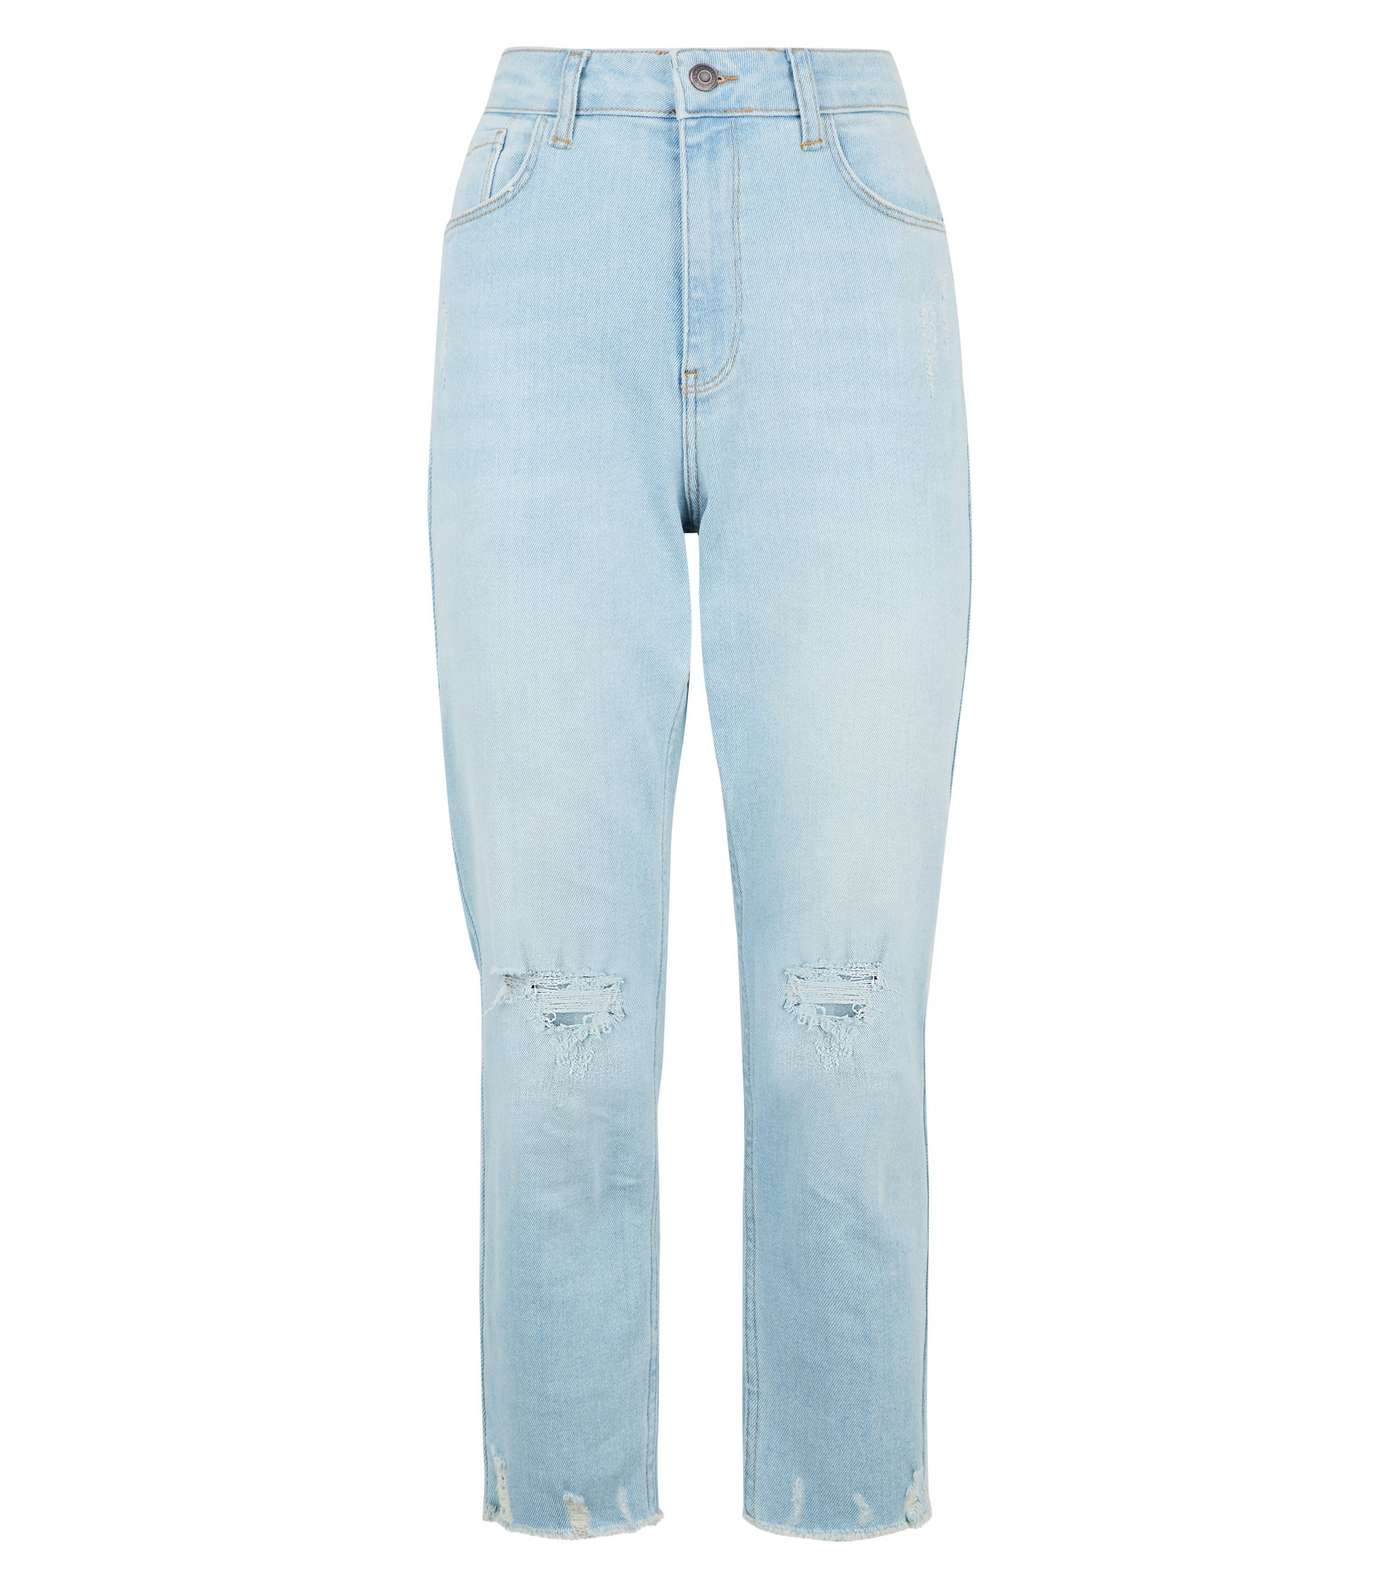 Petite Pale Blue Bleach Wash Ripped Mom Jeans  Image 4